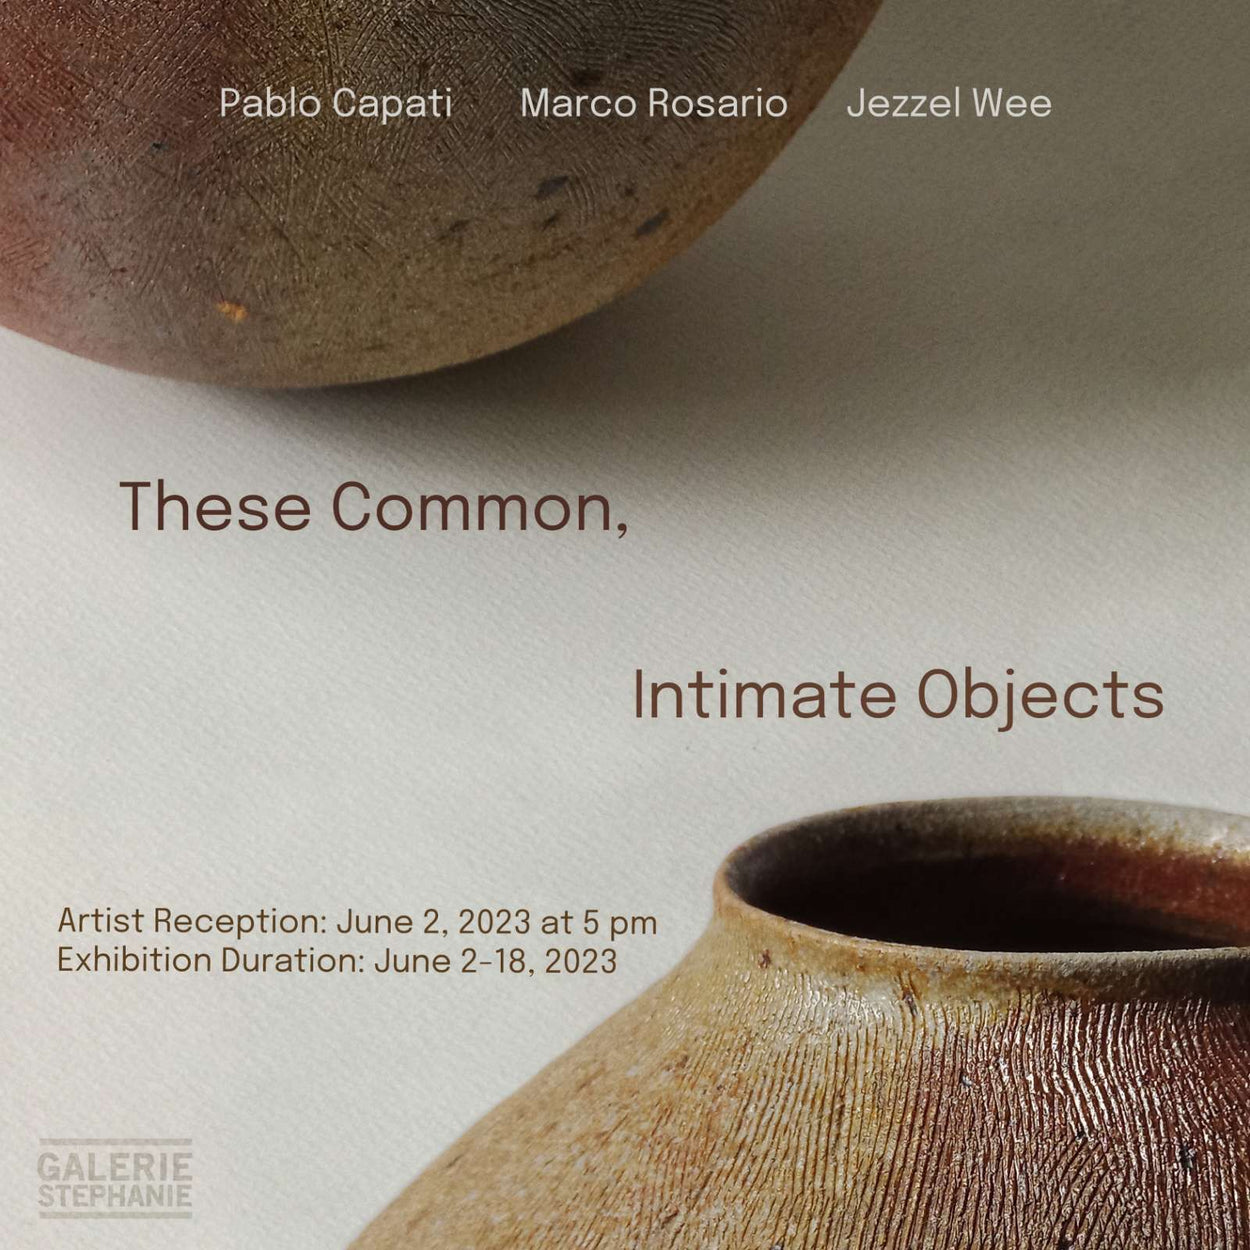 These common, intimate objects